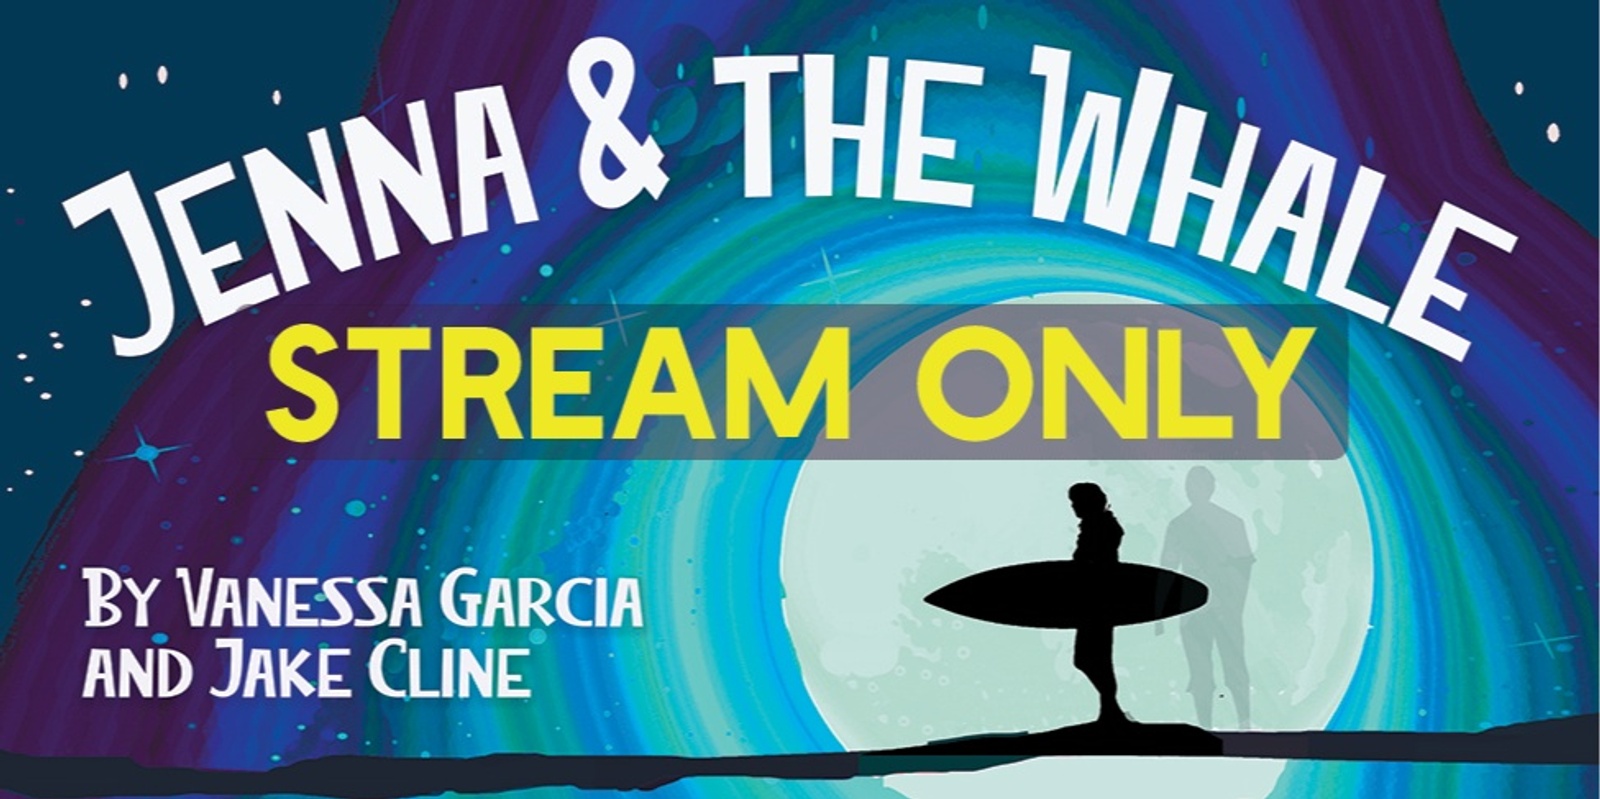 Banner image for STREAM Jenna & the Whale STREAM